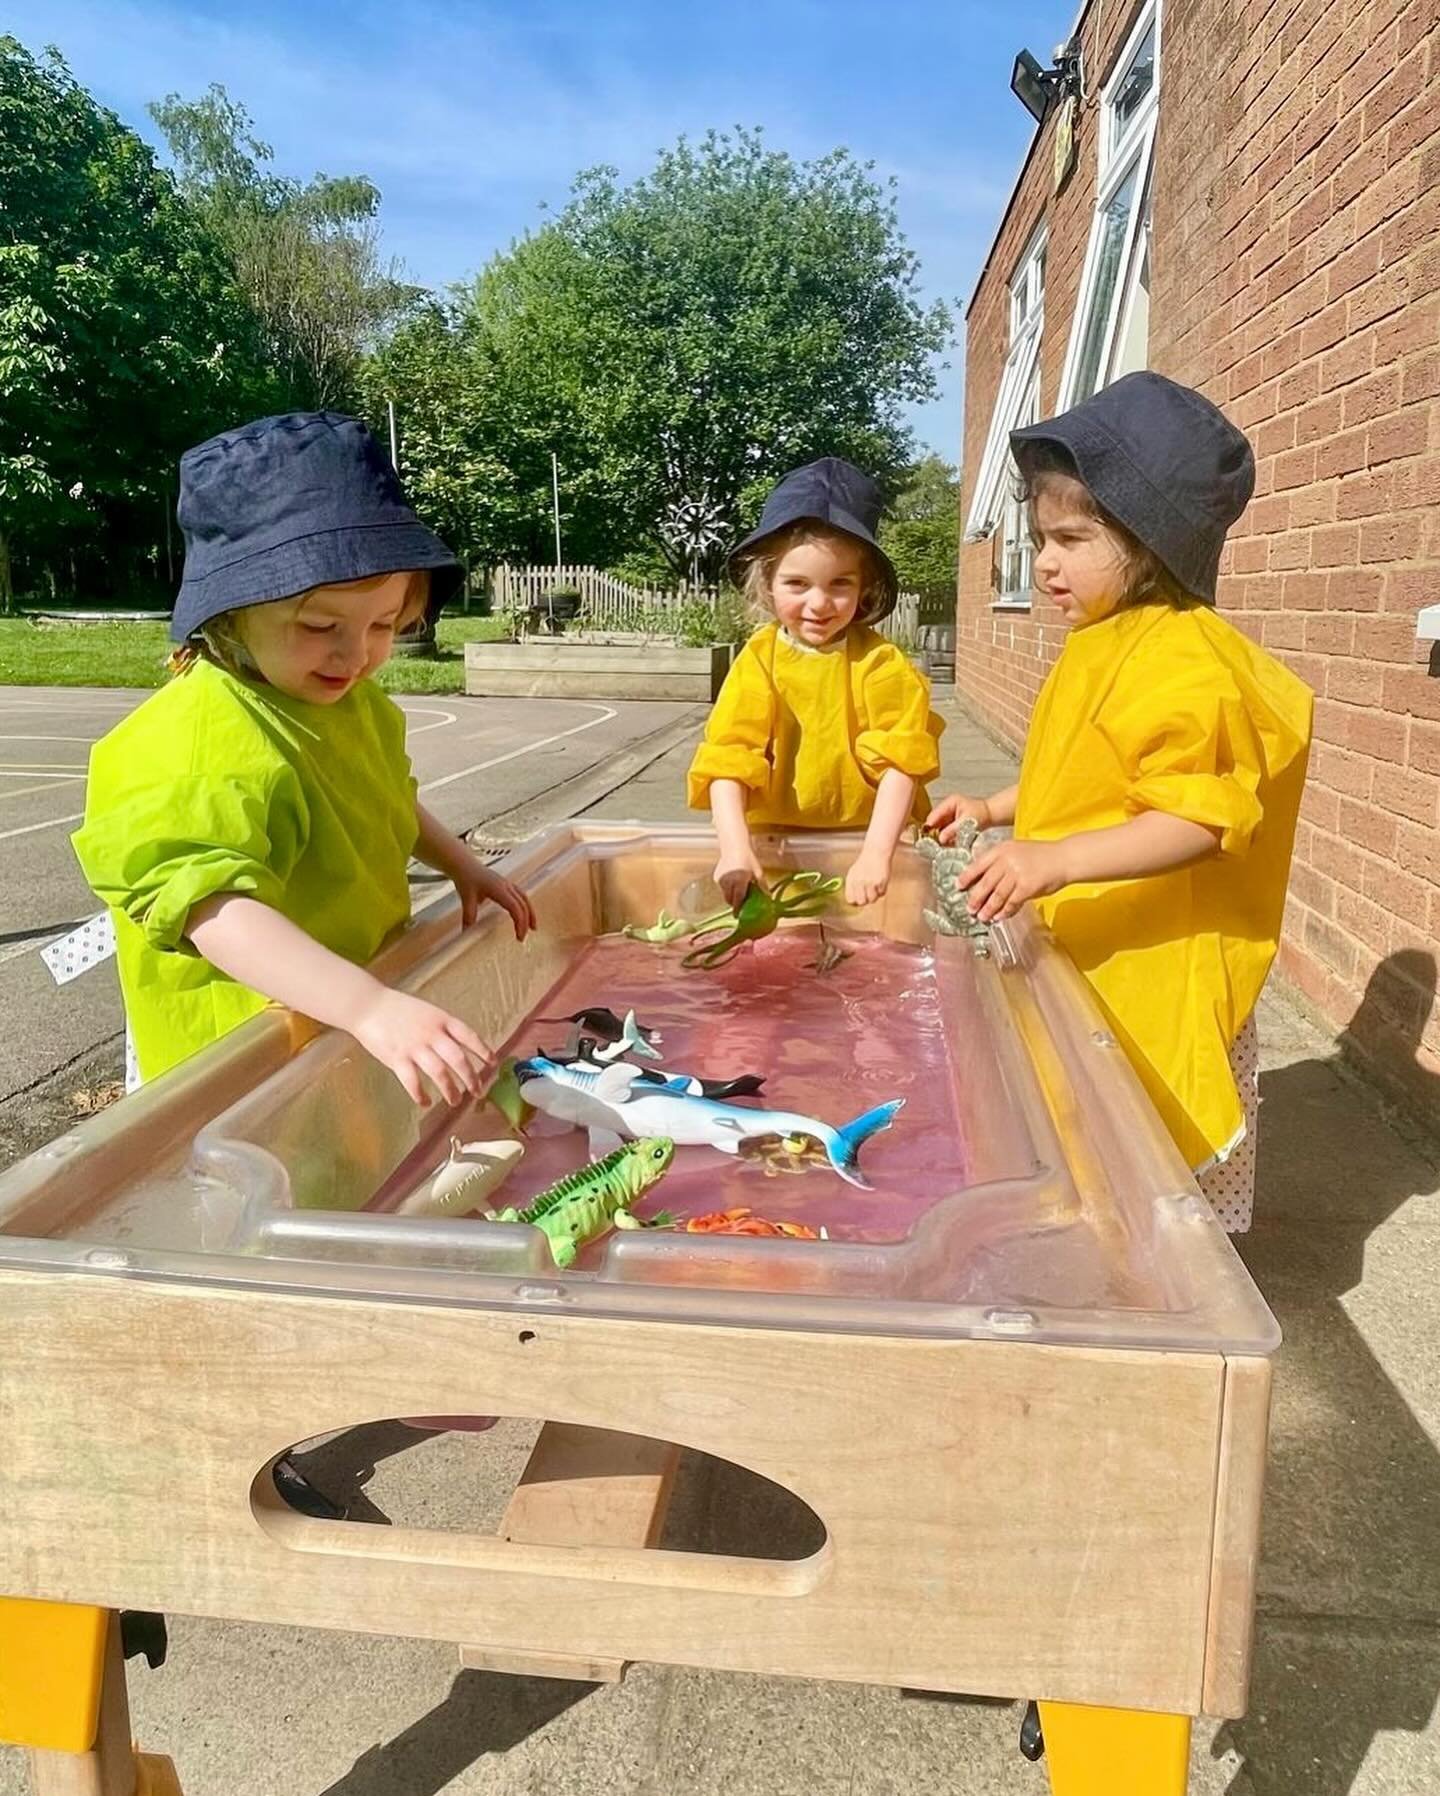 Our Codlings (2-3 years old) have loved enjoying the sunshine to explore all of their outdoor activities and learning!☀️

#orchardschoolandnursery #prepschoolhertfordshire #preprepschool #prepschool #primaryschool #nursery #outdoorlearning #leanringt